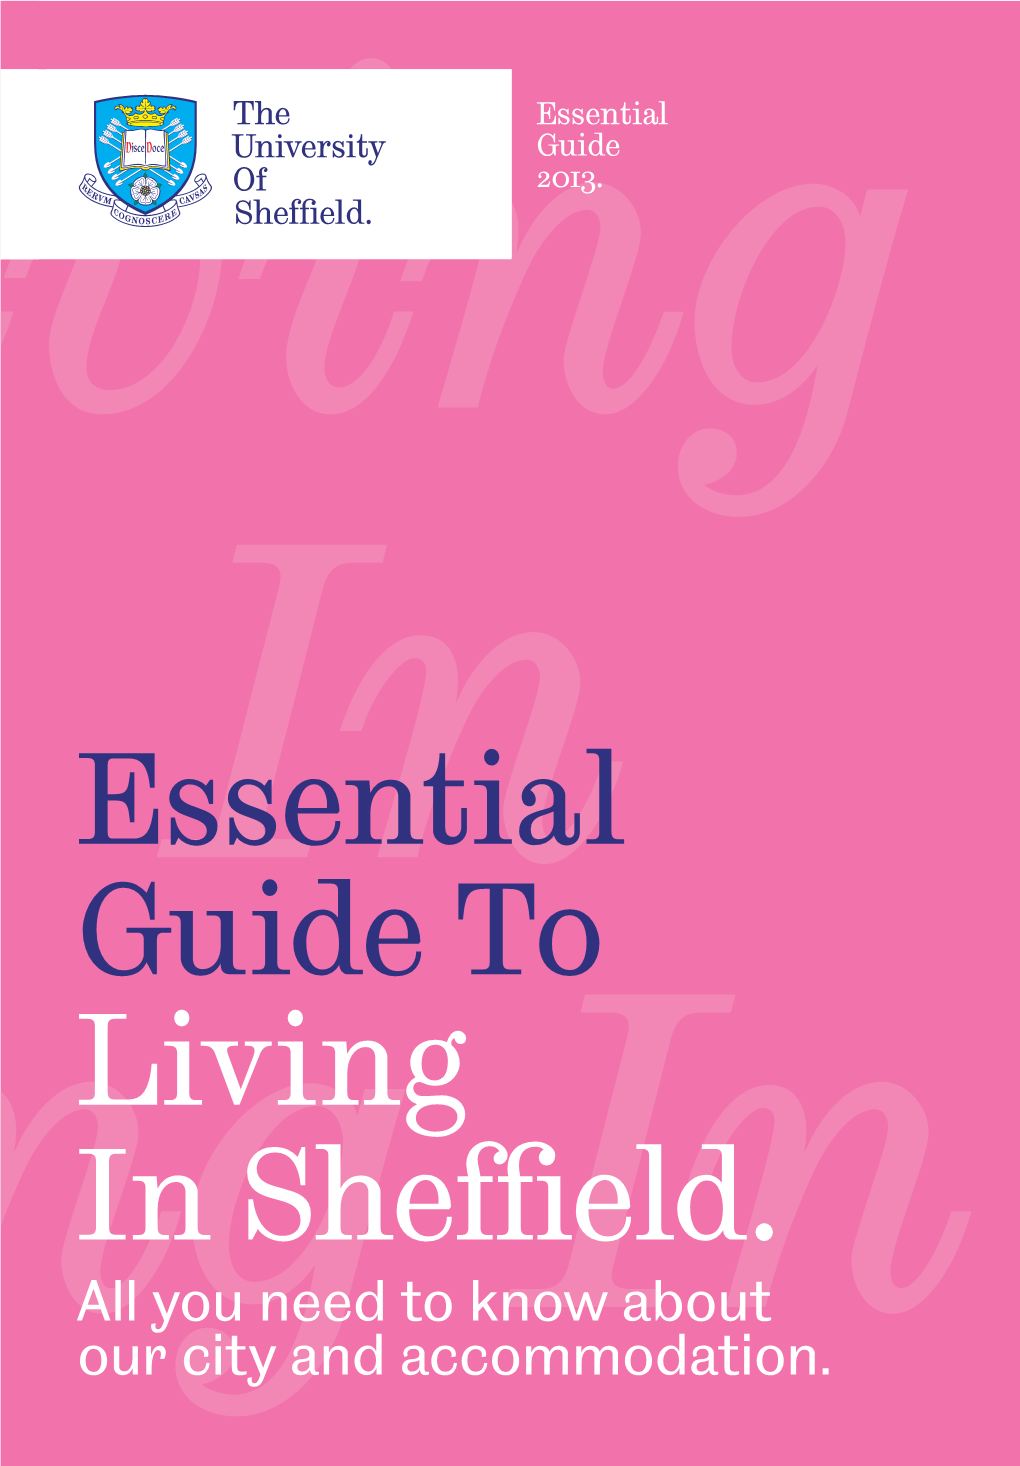 Essential Guide to Living in Sheffield